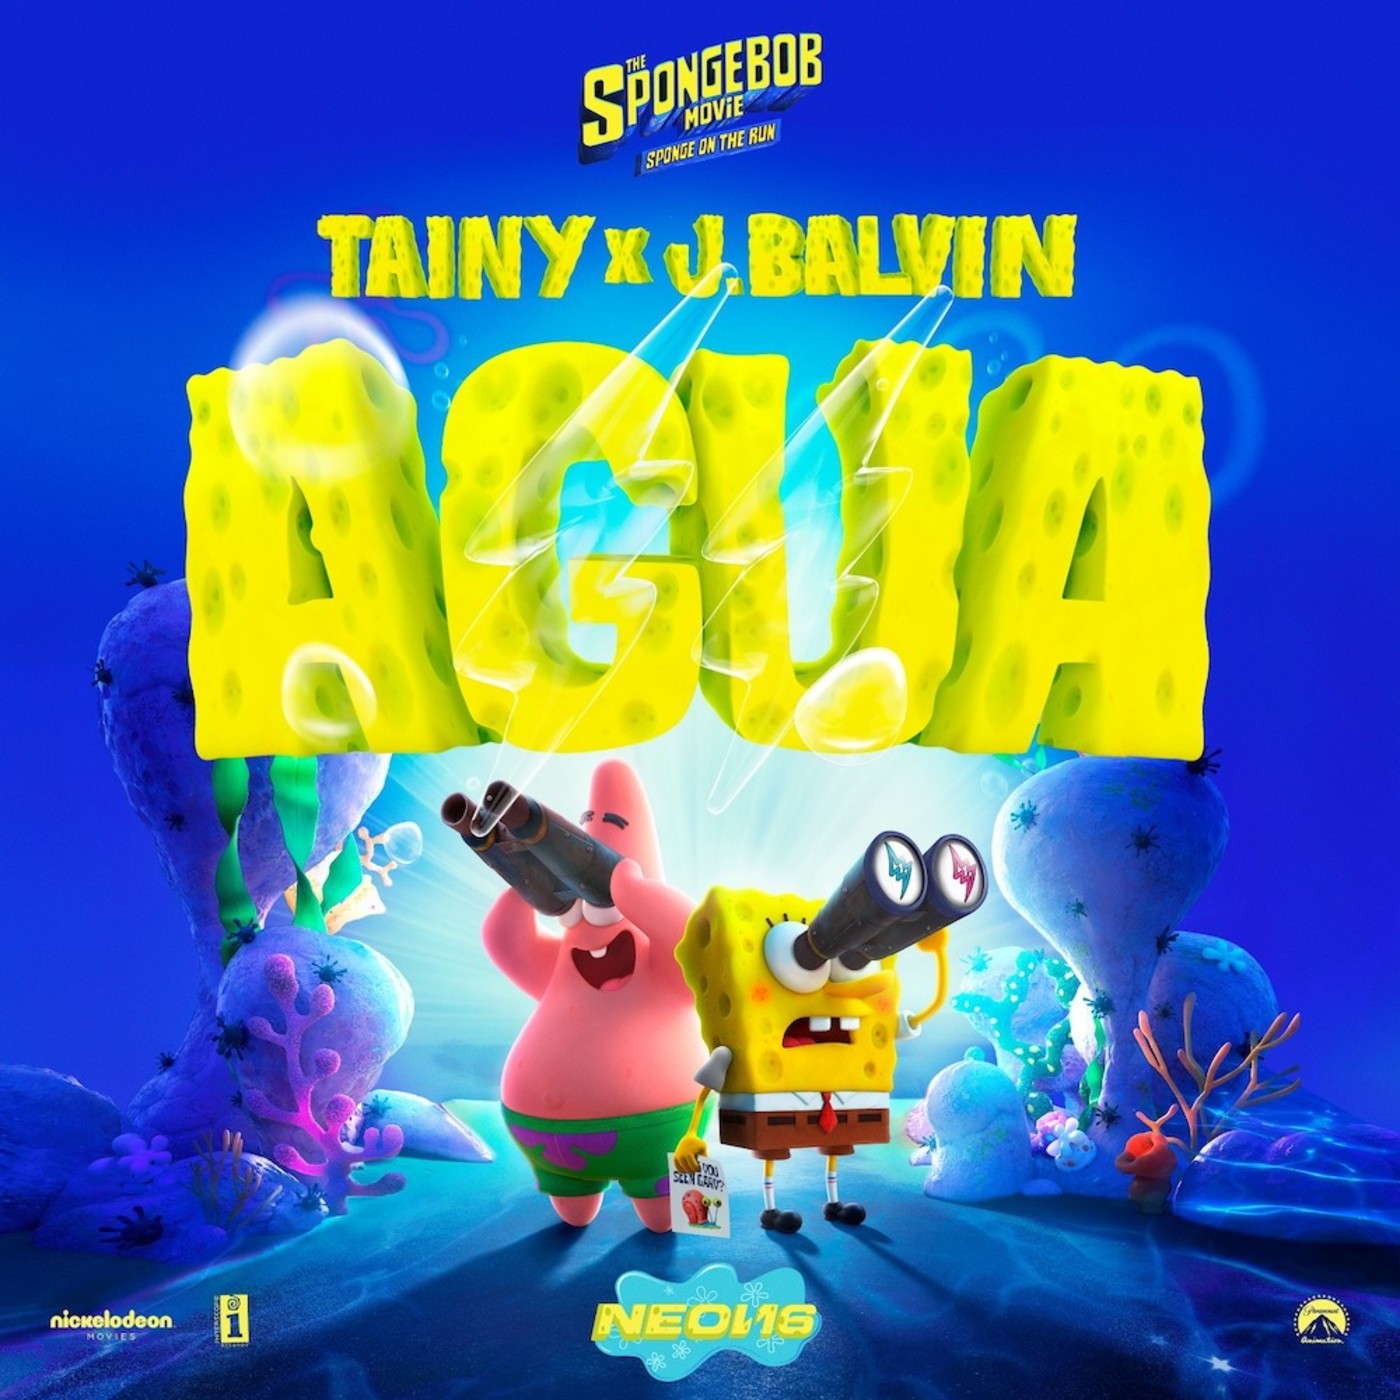 Listen To J Balvin And Tainy S New Song Agua Complex - dj spongebob roblox